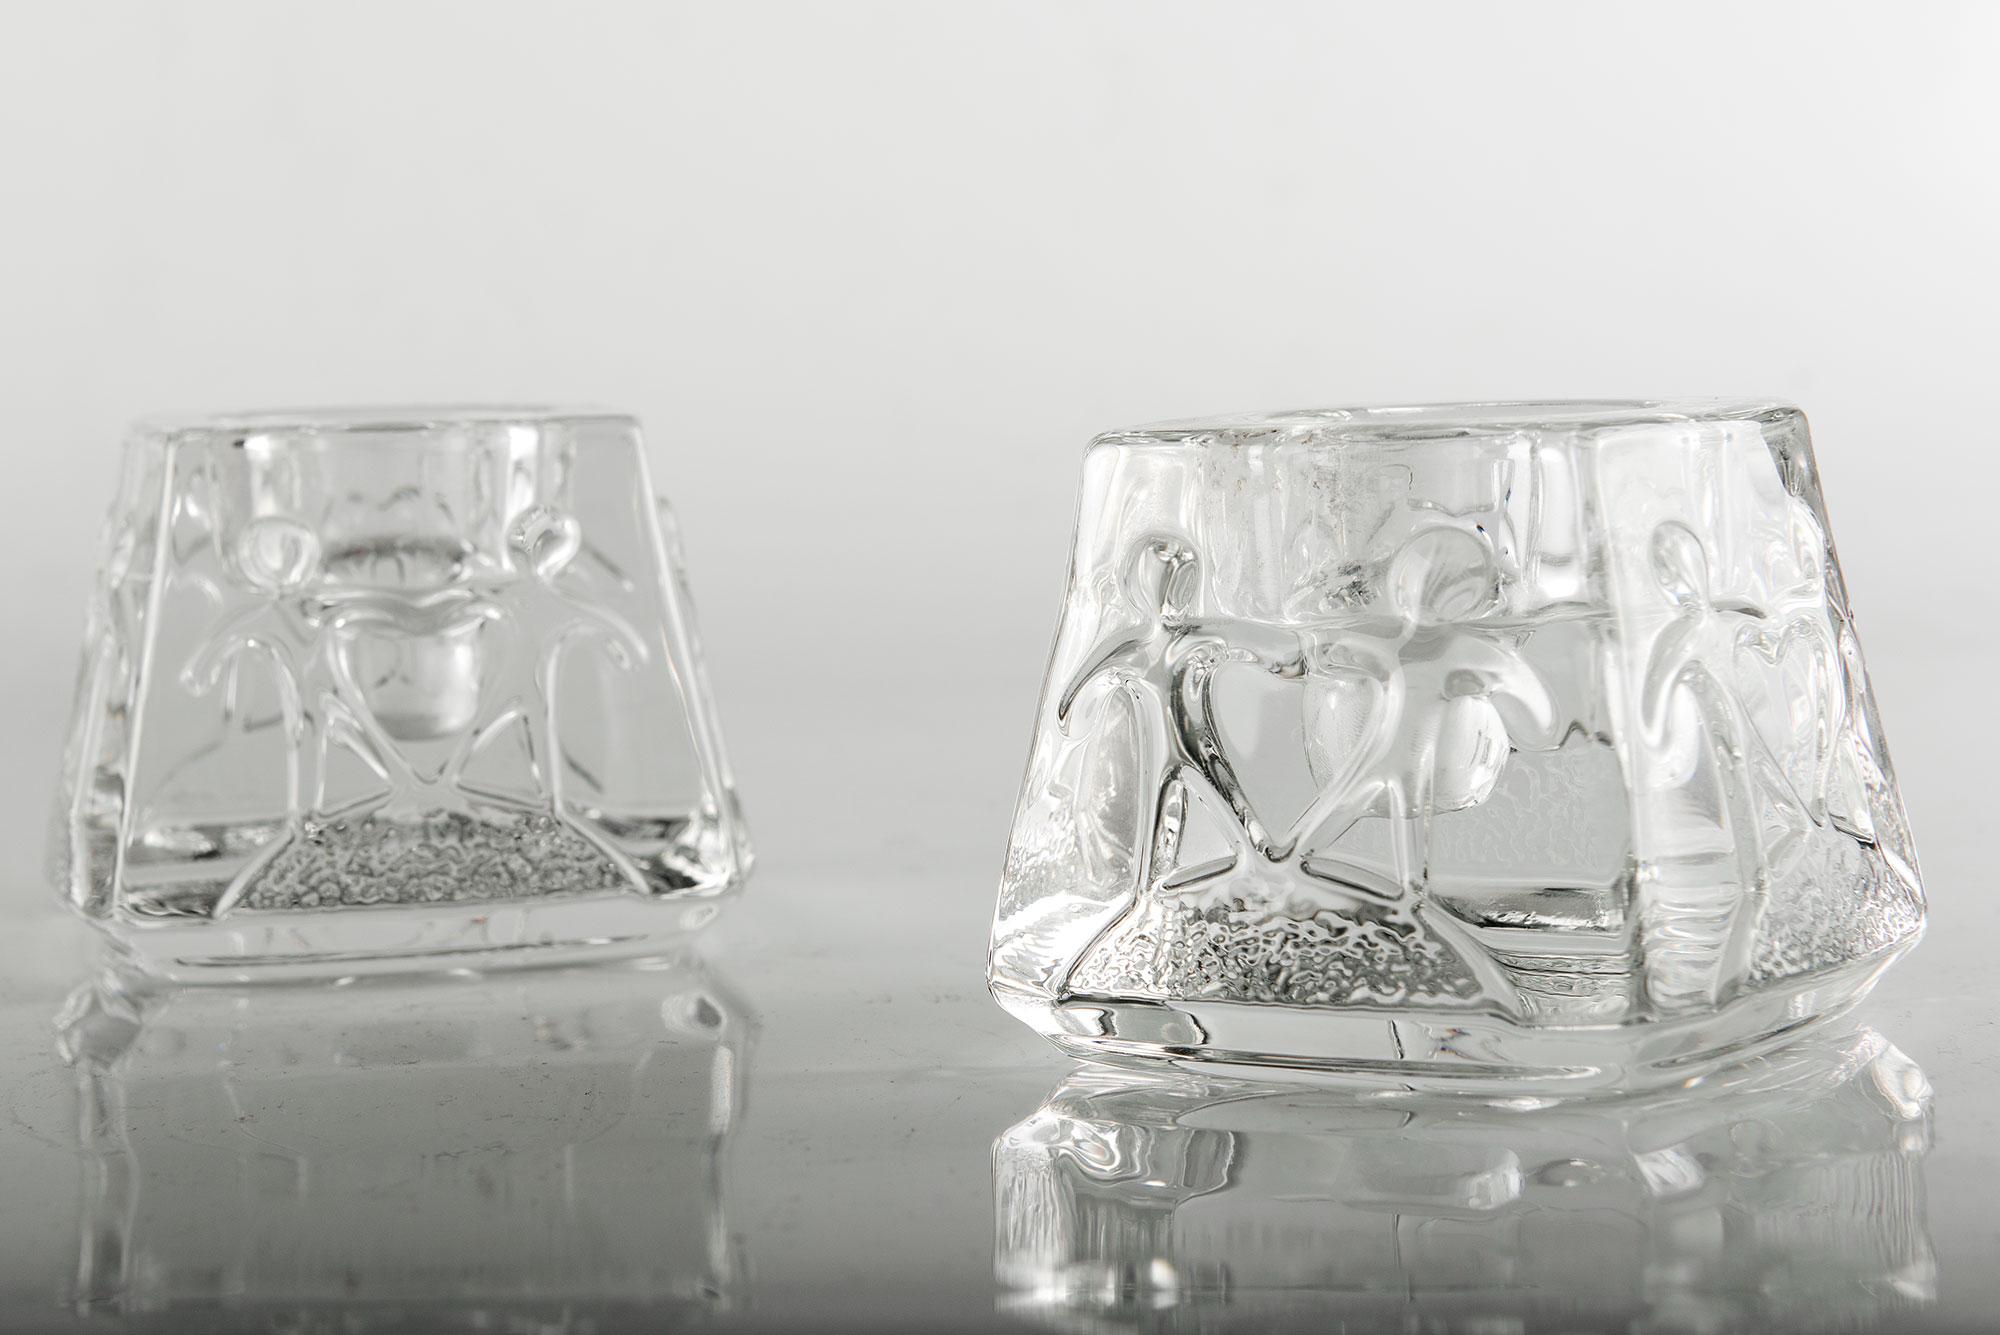 Beautiful Crystal Glass Candle Holder by Orrefors, Sweden.
Original label and signature on the base.